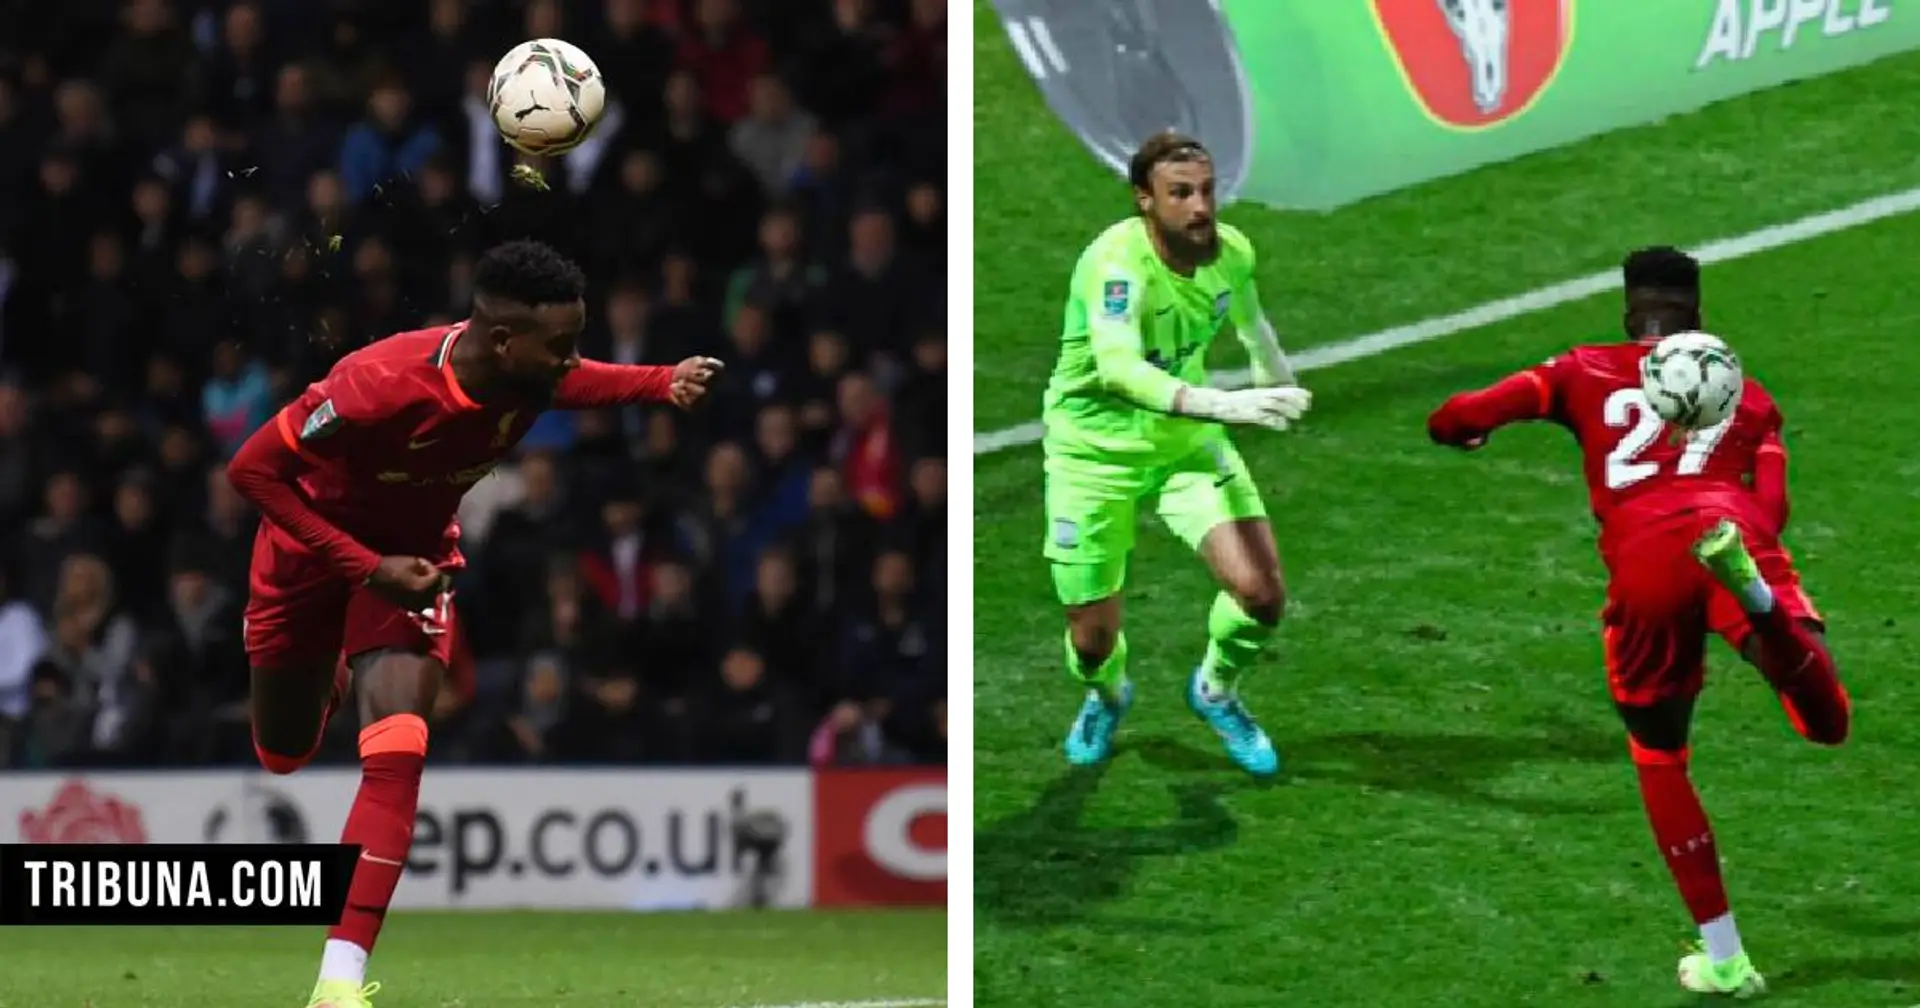 League Cup King: Breaking down Origi's top stats in the competition after Preston wonder-goal (video)